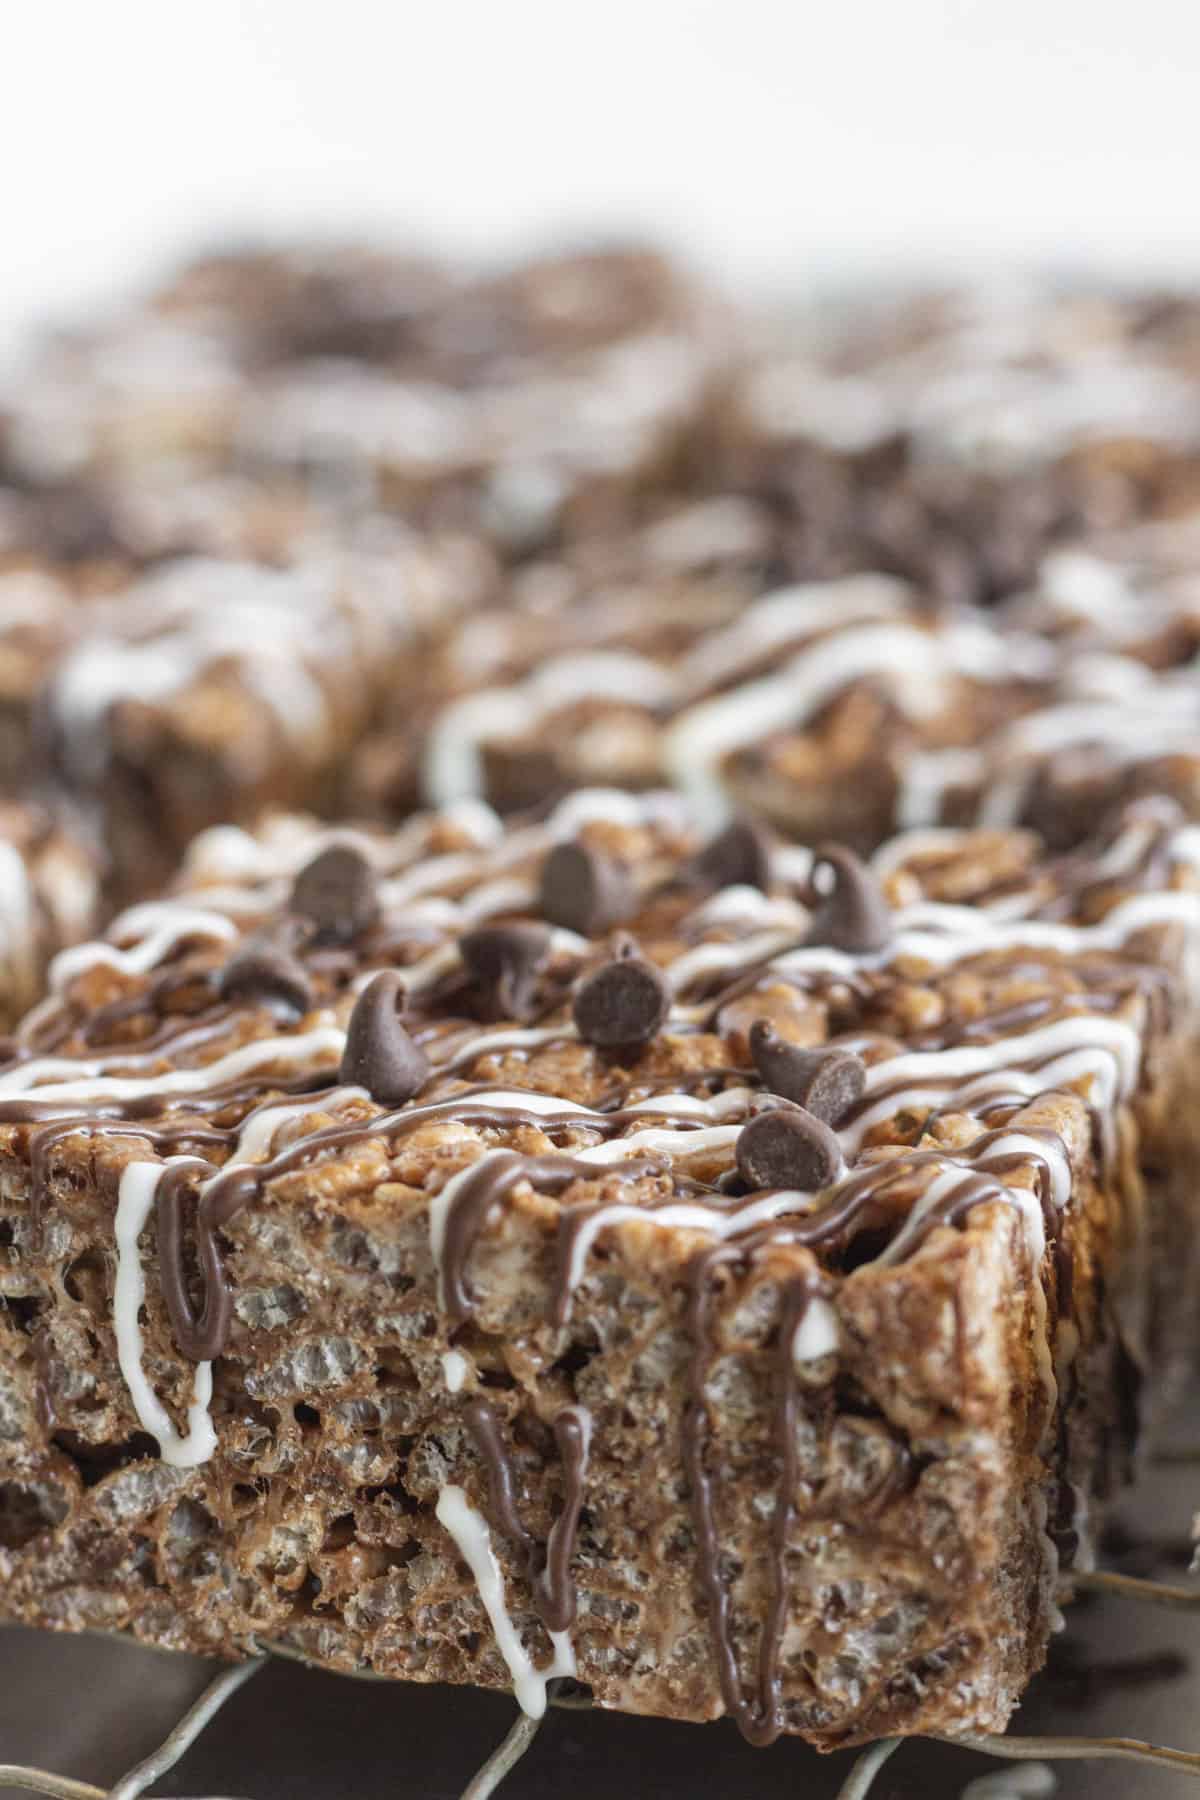 A close up photo showing the chocolate drizzle of each square.